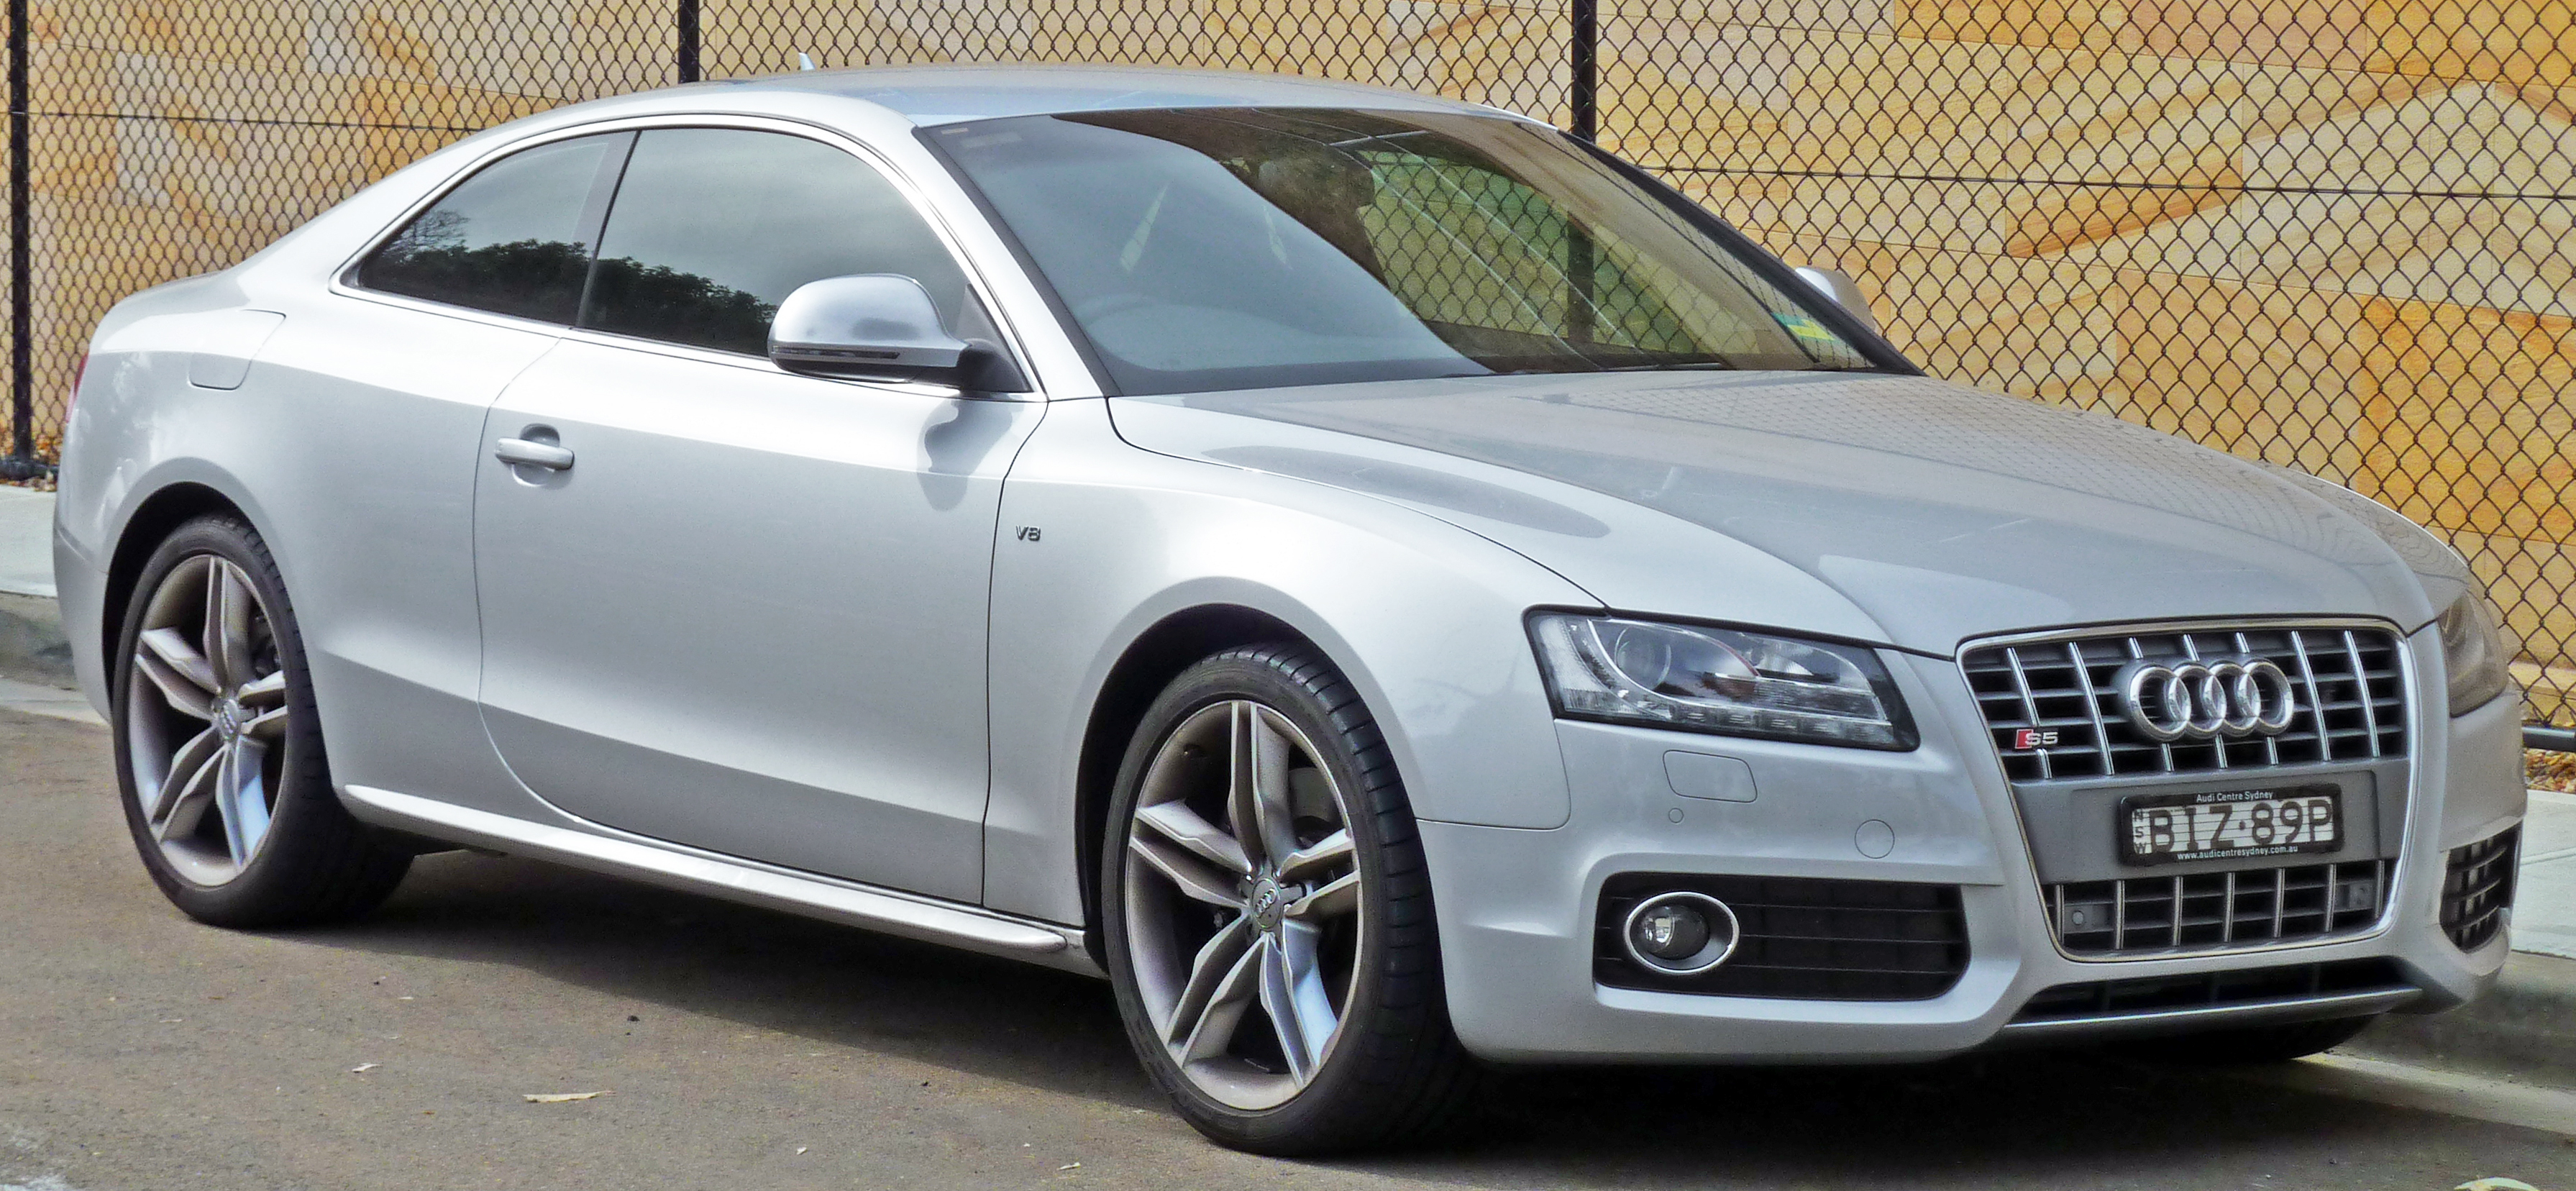 File:2007-2010 Audi S5 (8T) coupe 02.jpg - Wikimedia Commons